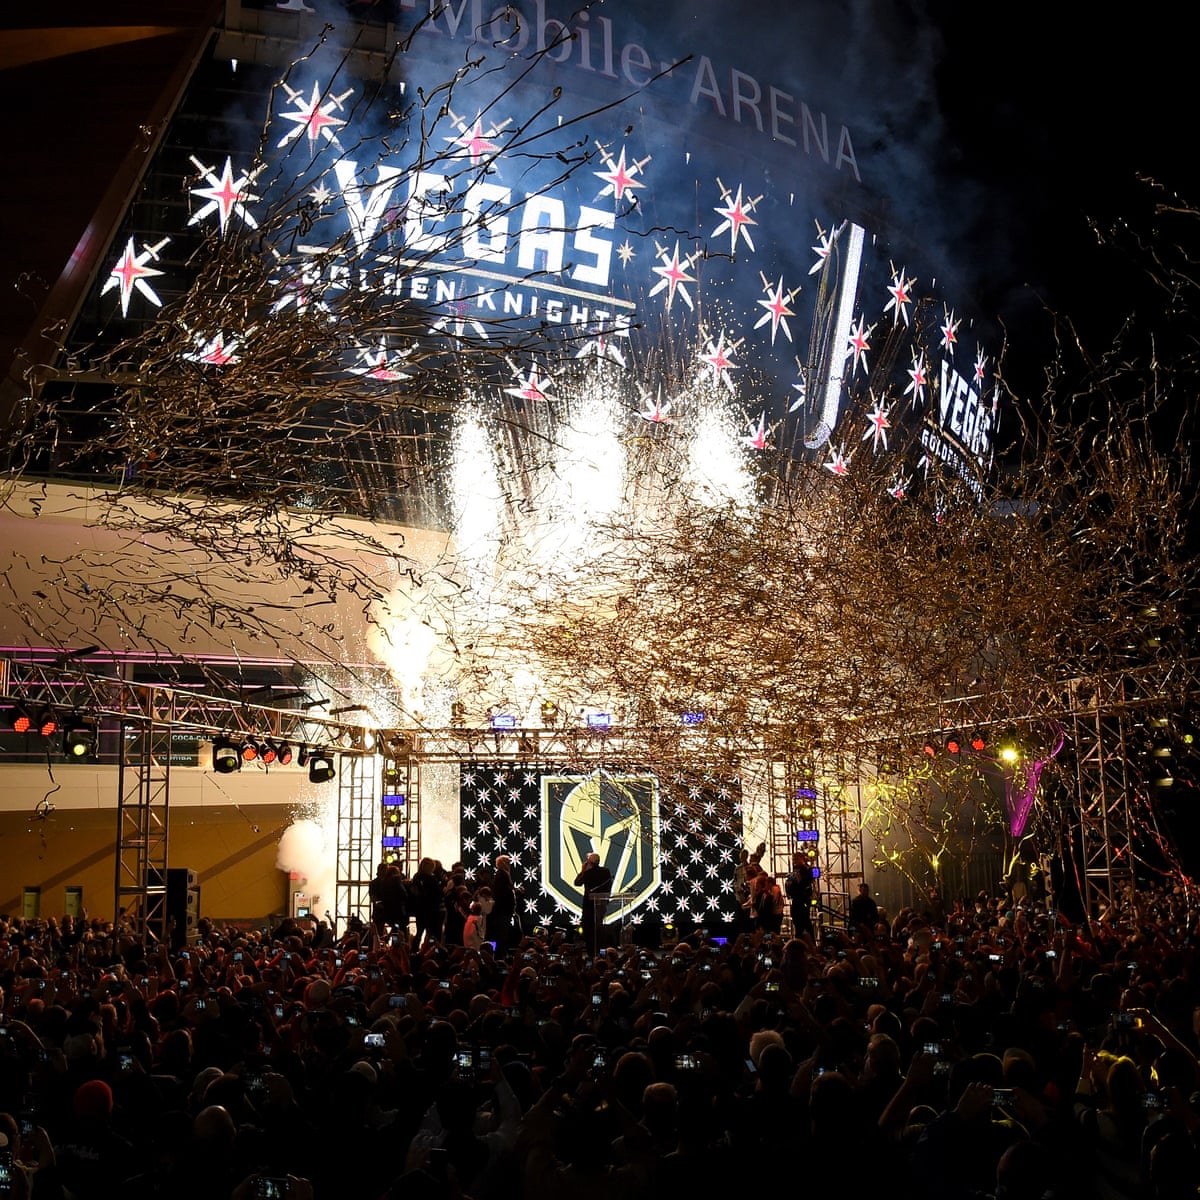 Vegas S New Nhl Team Golden Knights Cool Name Or Just Very Very Bad Nhl The Guardian